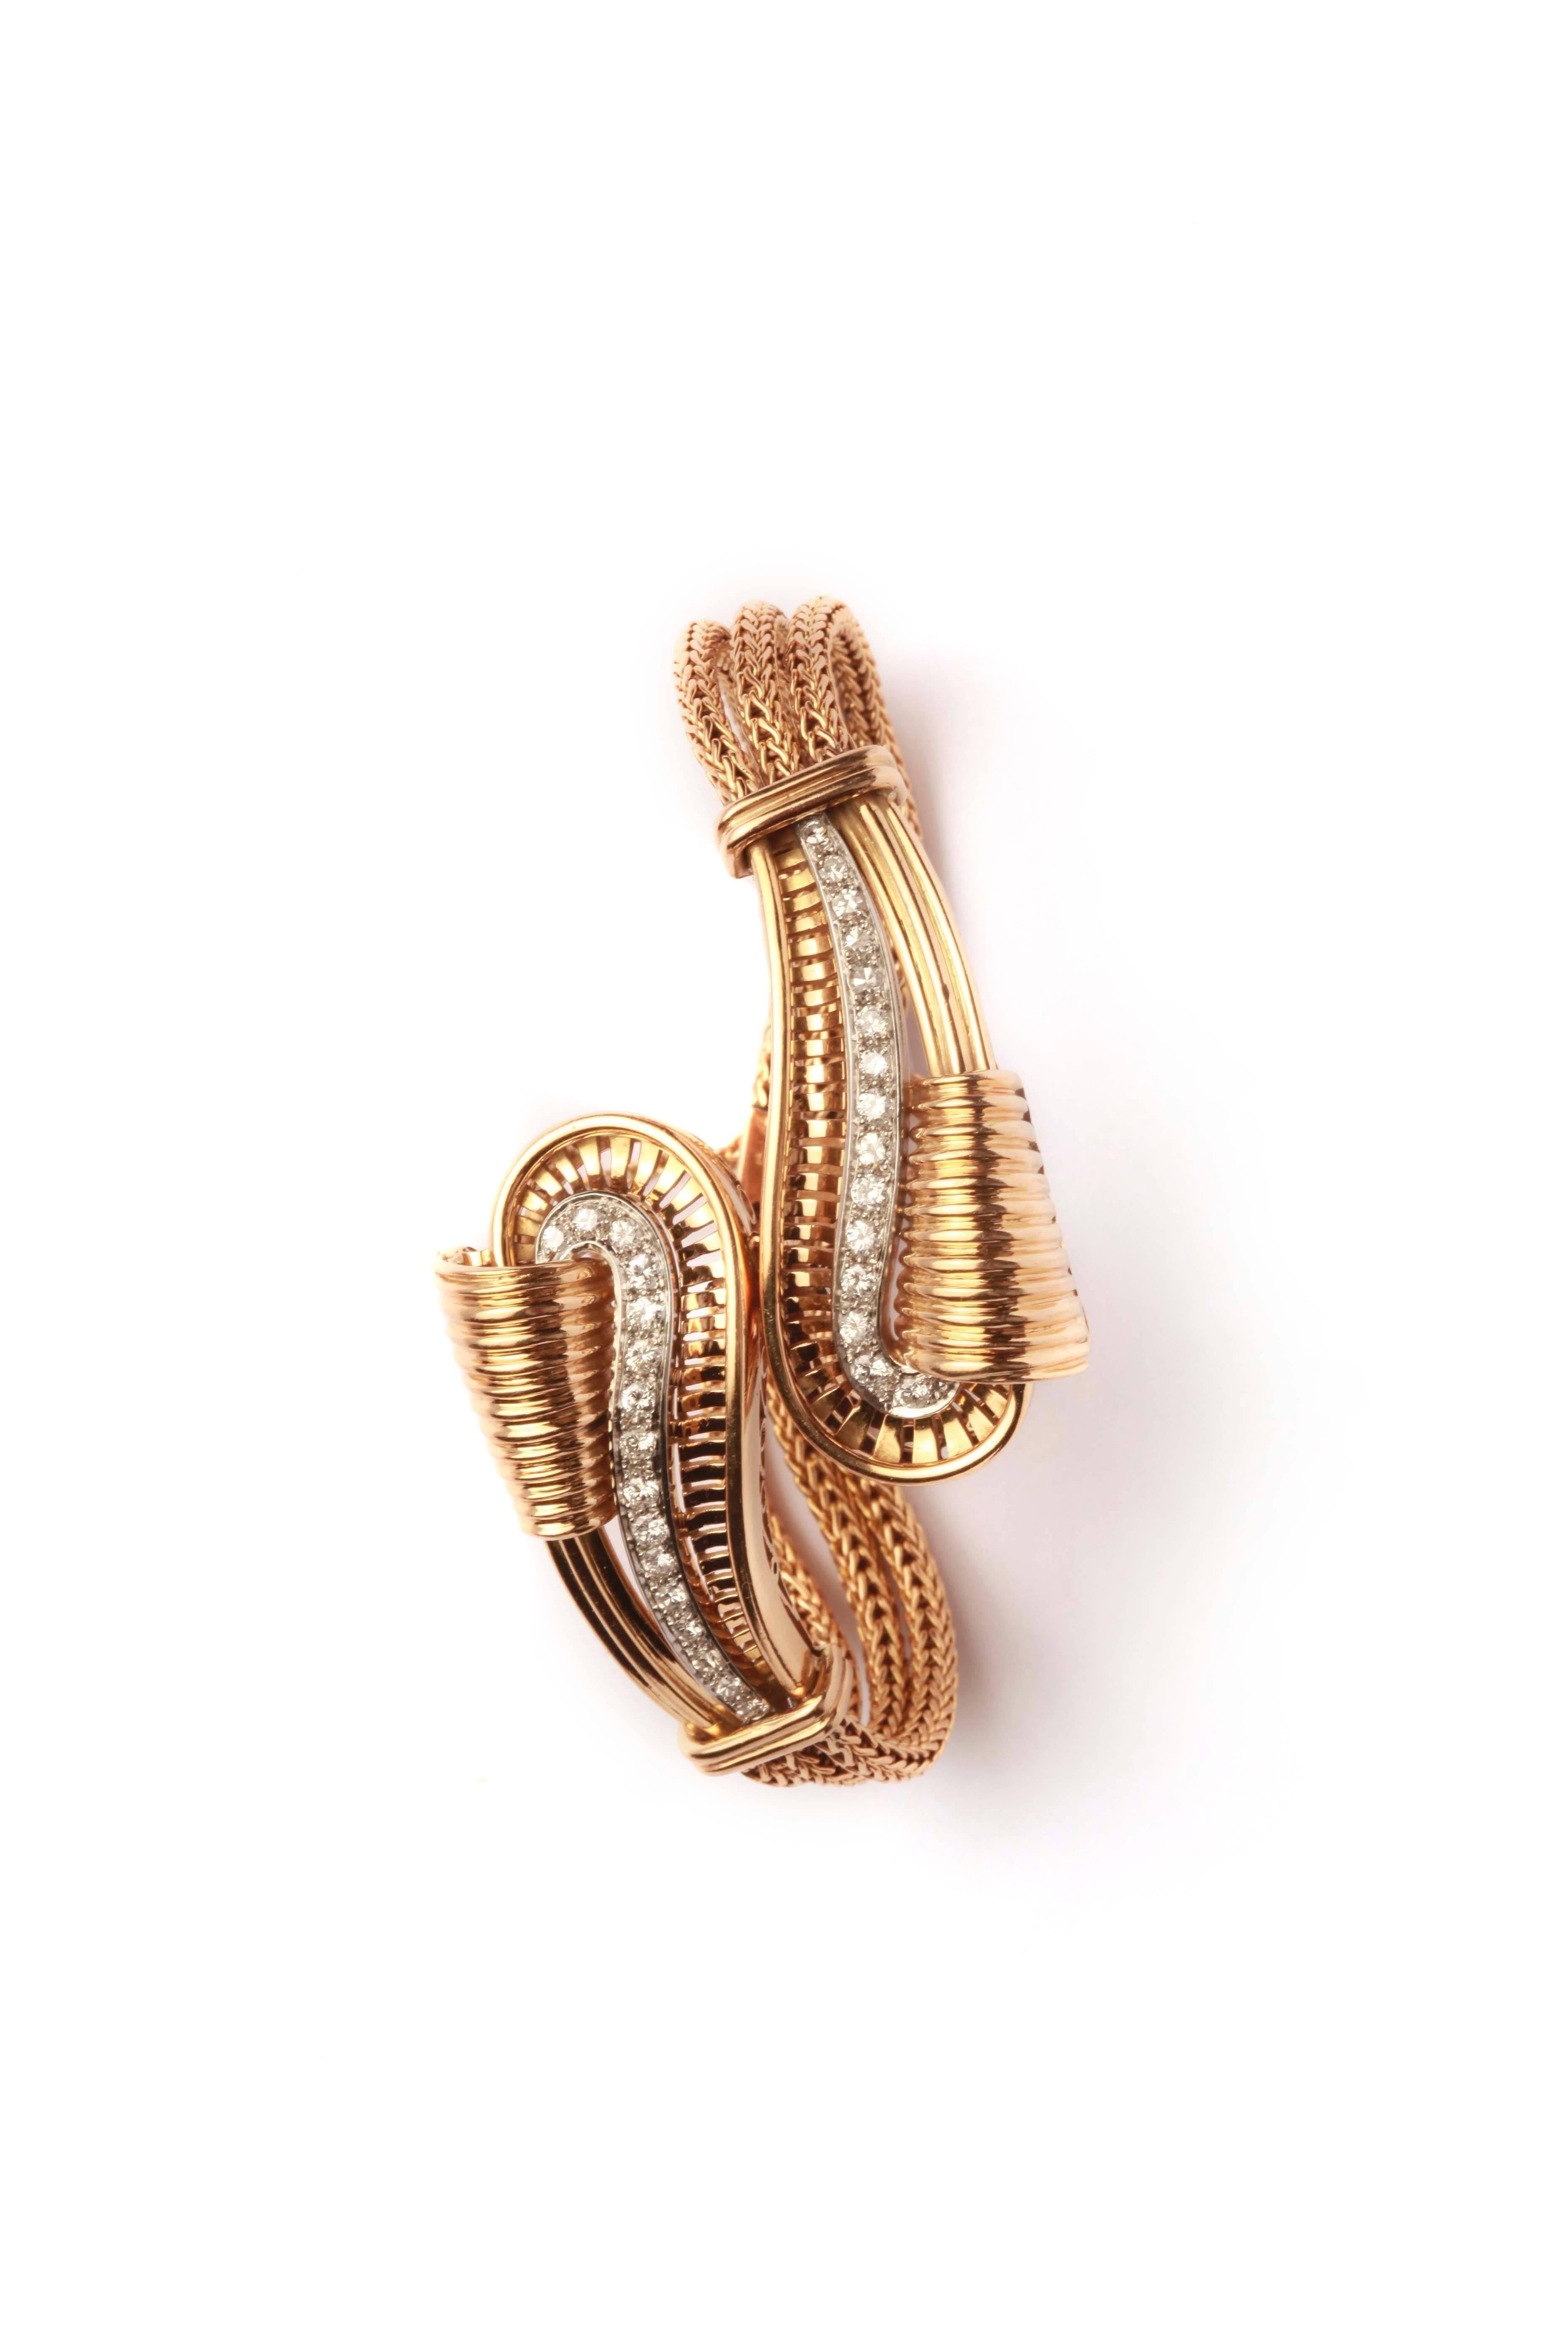 A Retro woven and fluted 18kt yellow gold bracelet, highlighted with brilliant cut diamonds. Made in Italy, circa 1950 